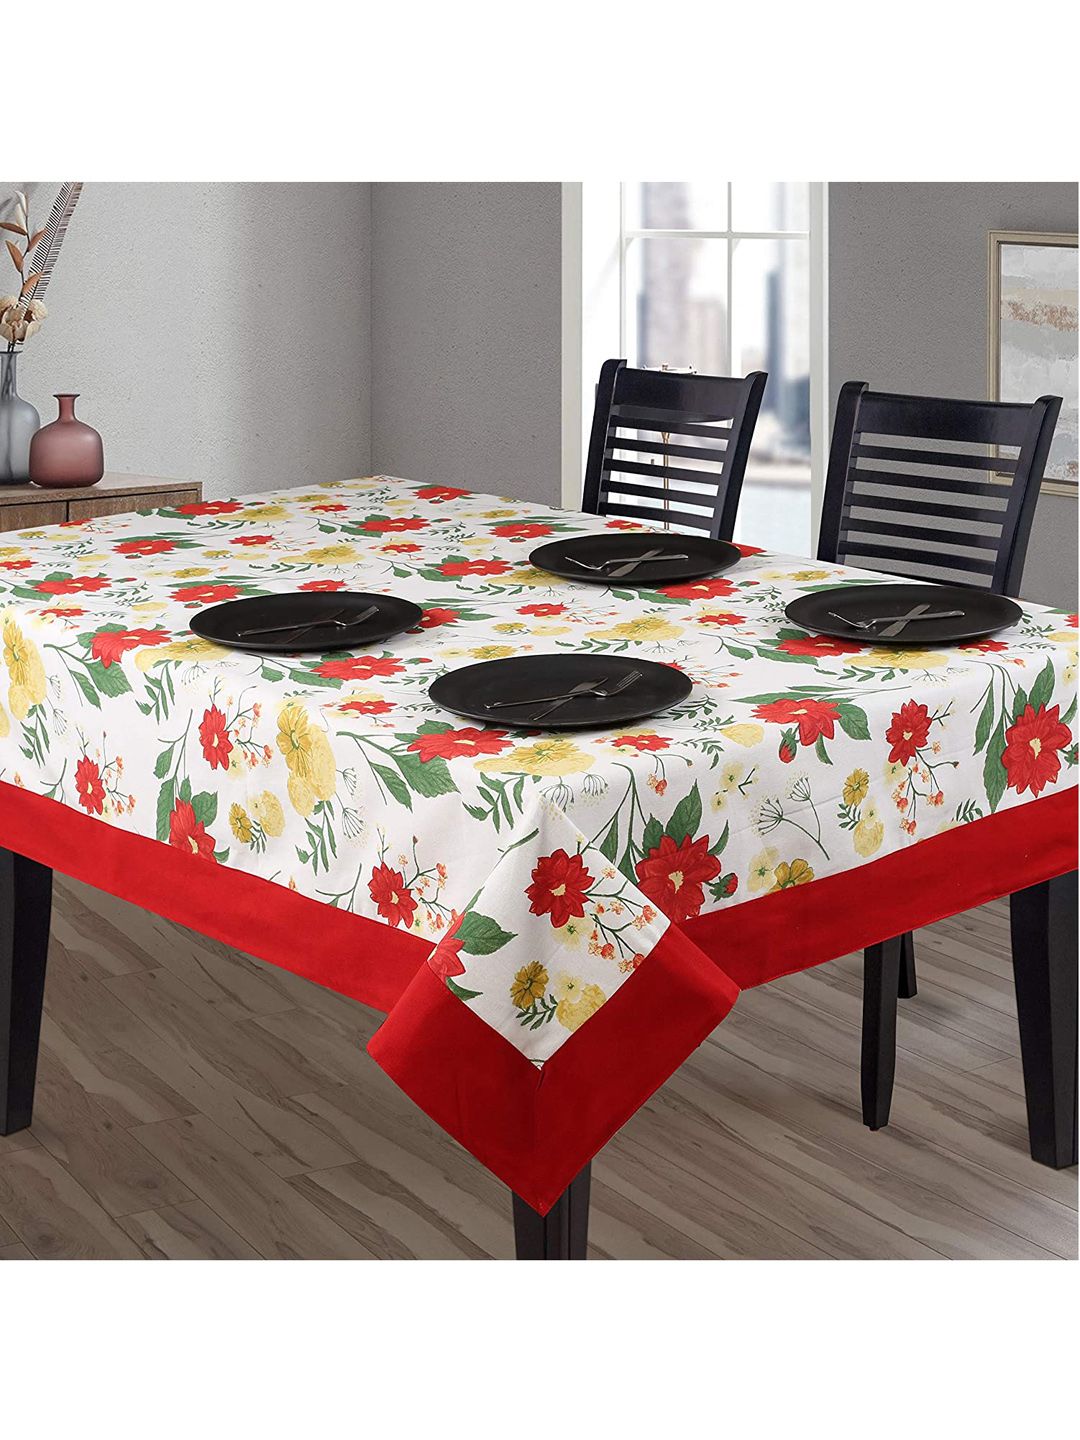 SHADES of LIFE White & Red Floral Printed Cotton 2-Seater Table Cover Price in India